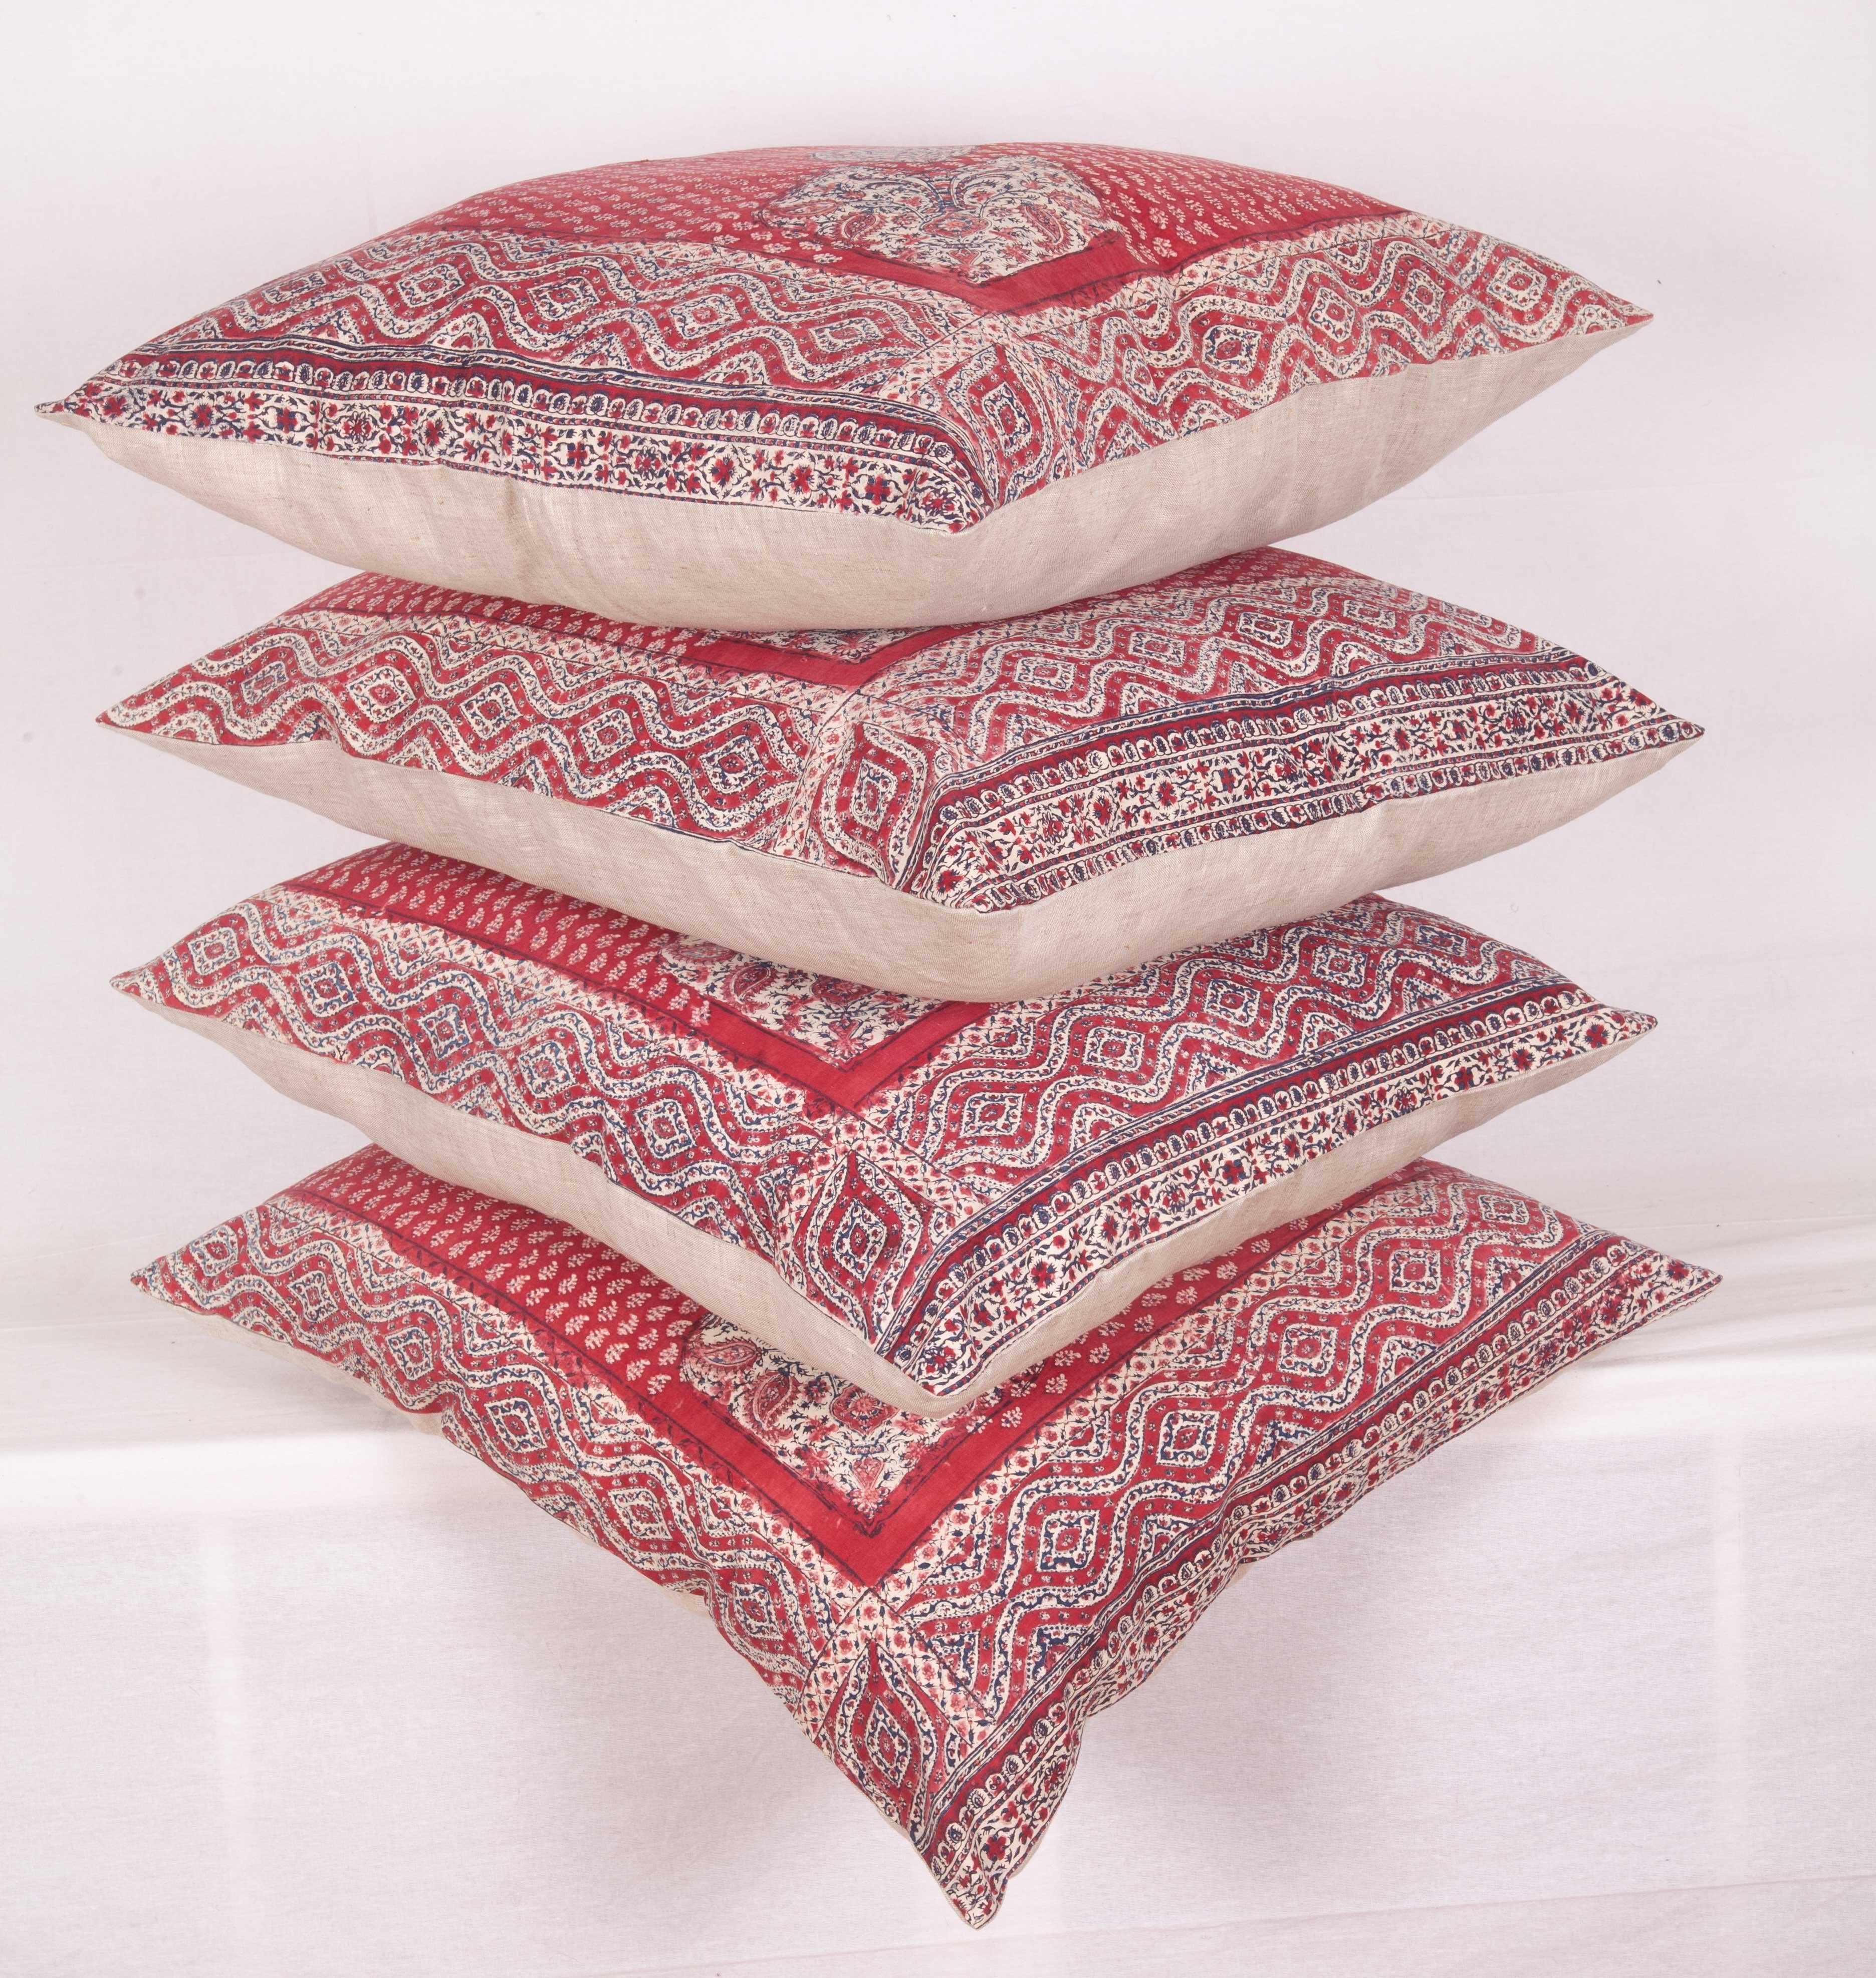 Pillow Cases Fashioned from an Antique Indian Kalamkari Panel 1